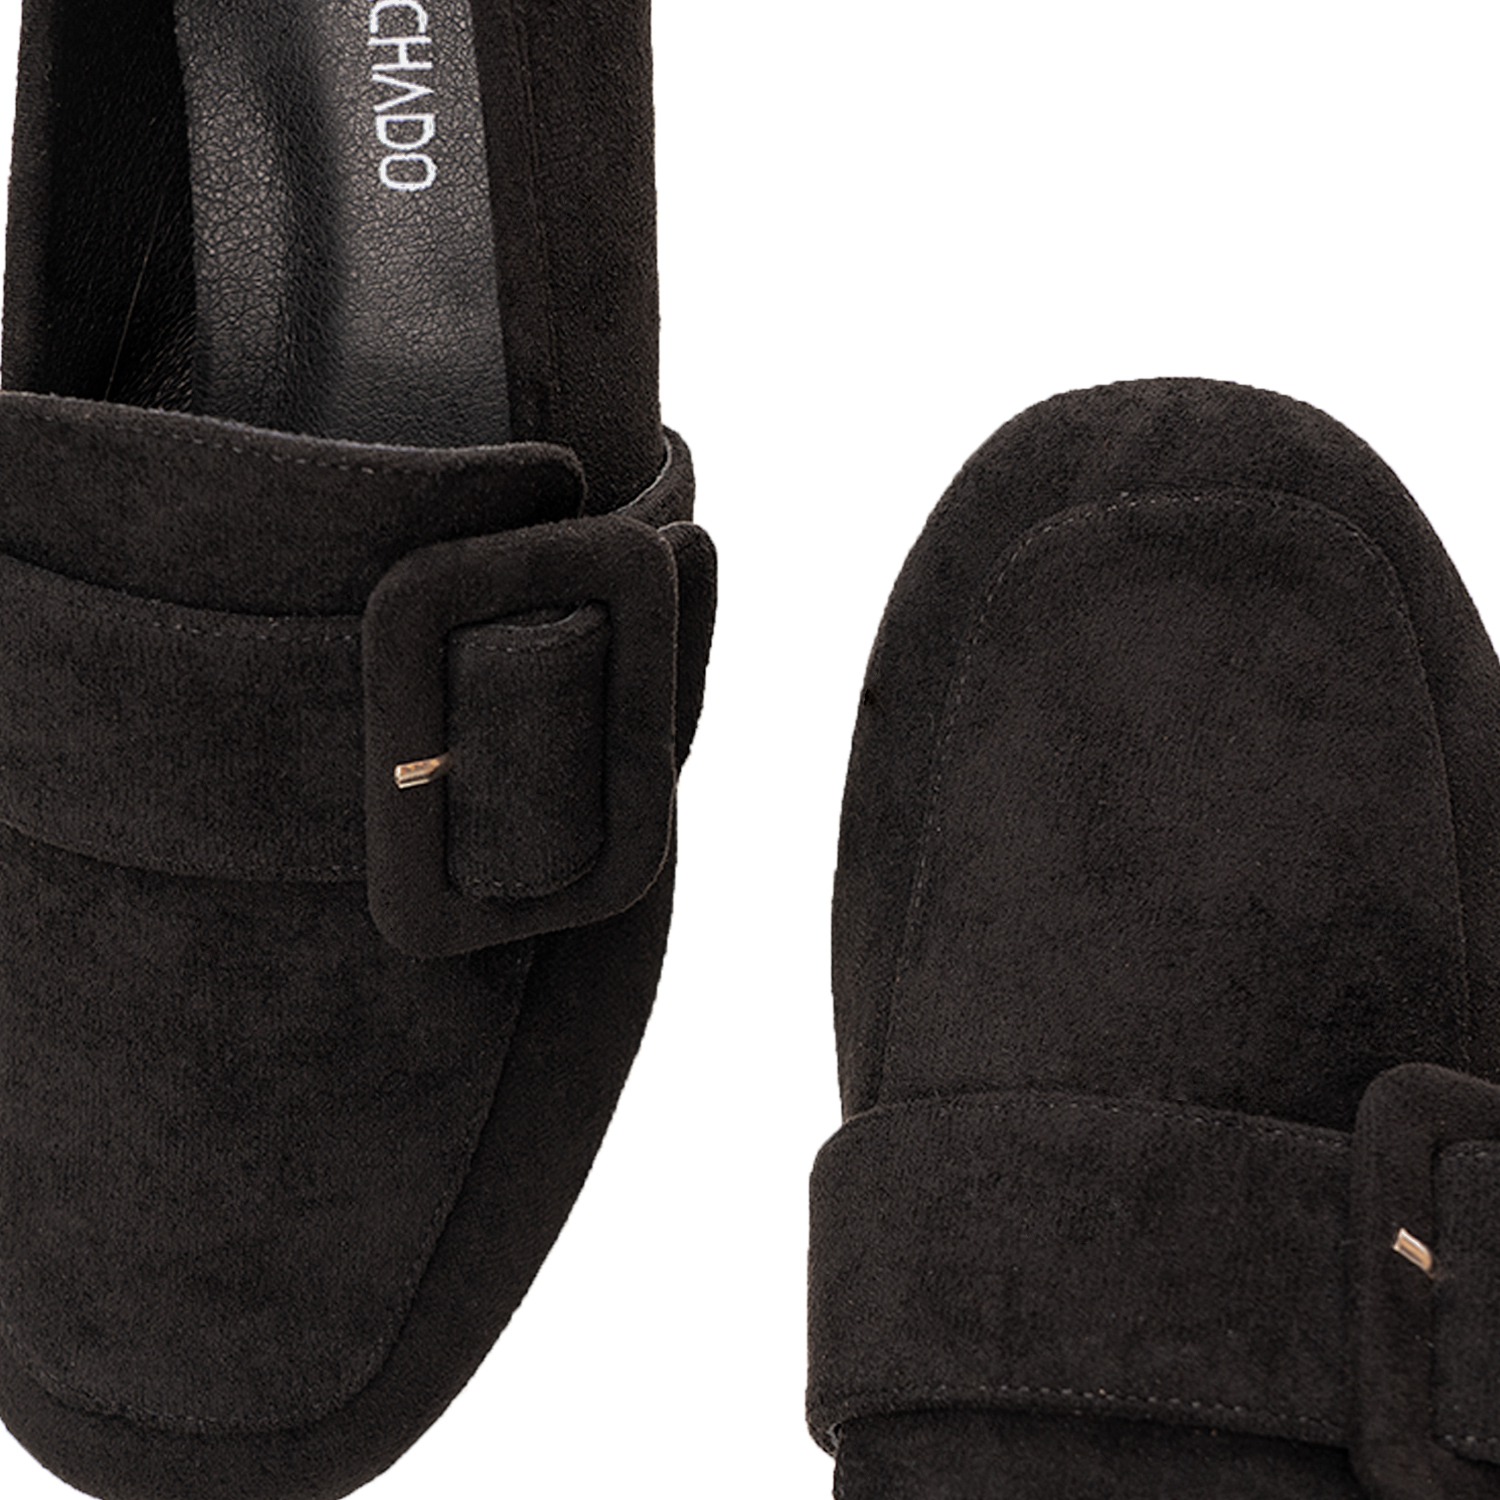 Moccasins in black faux suede and buckle detail 